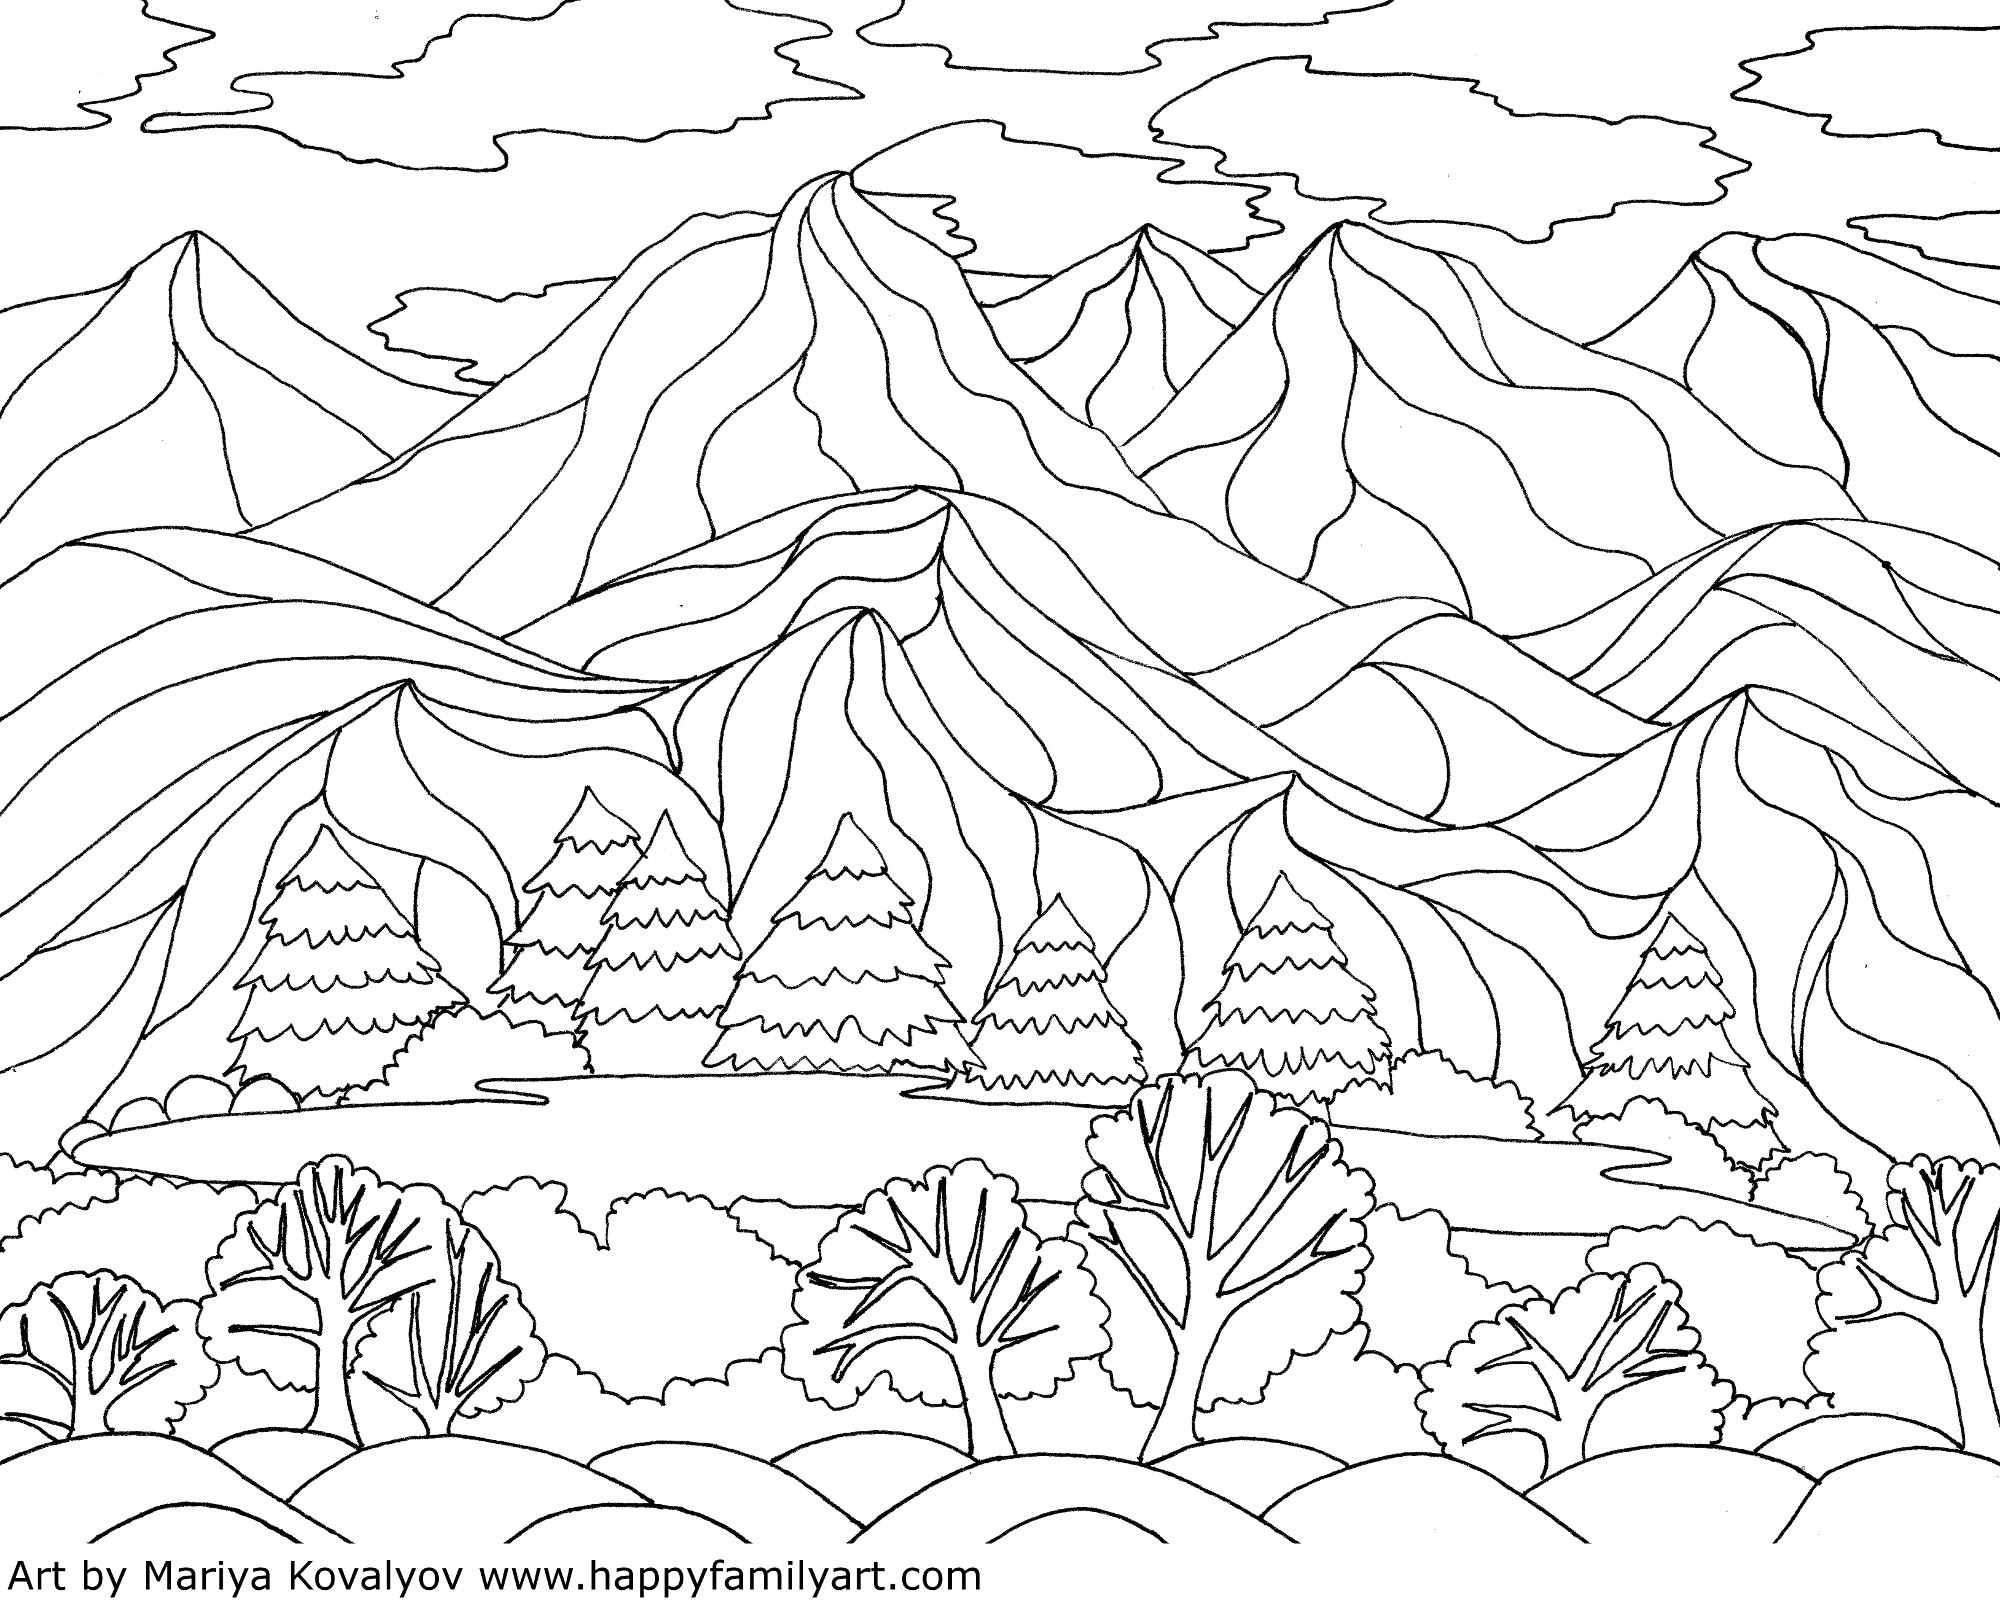 The Best Free Pointillism Coloring Page Images Download From